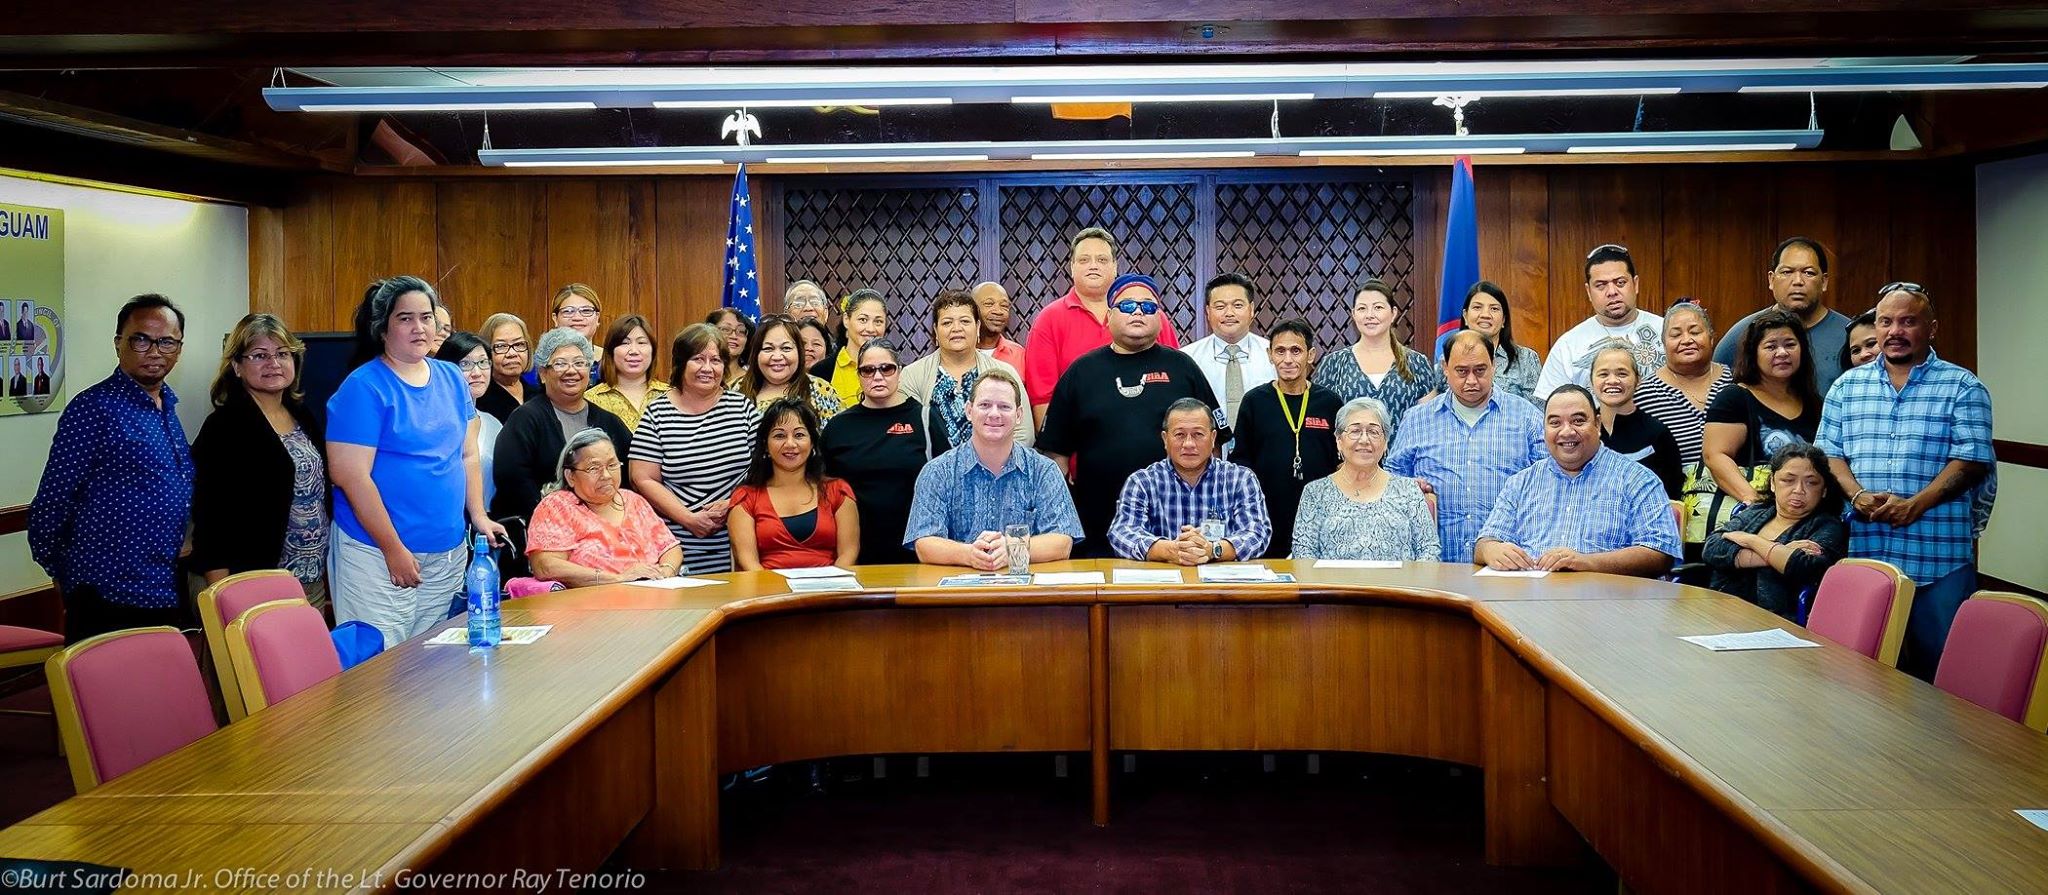 Large group poses for photo in Governor's conference room.